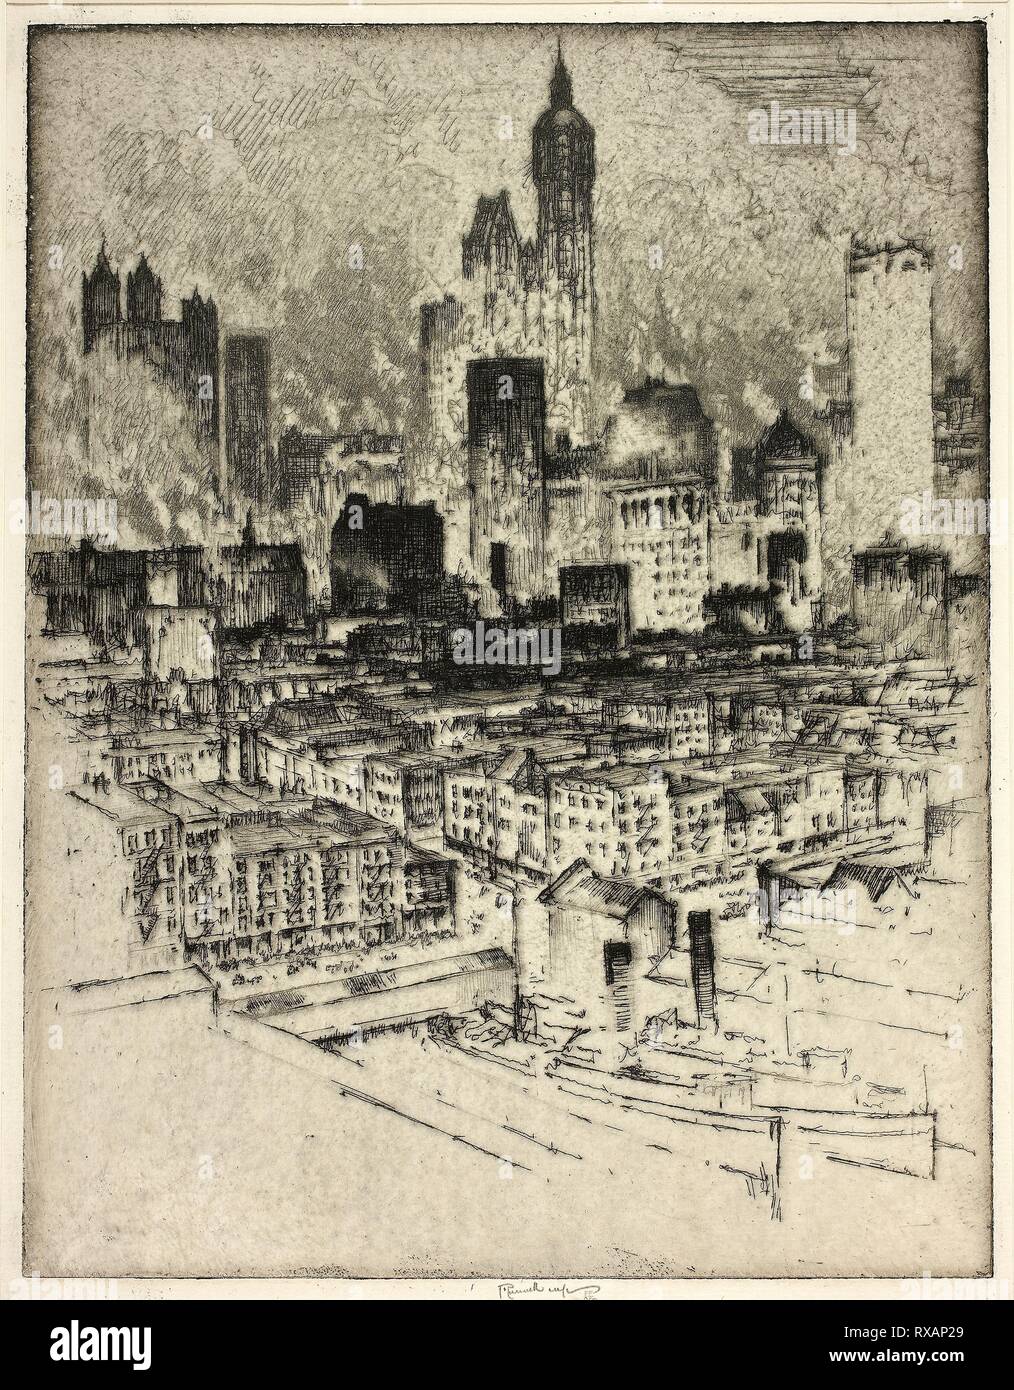 New York, from Brooklyn Bridge. Joseph Pennell; American, 1857-1926. Date: 1908. Dimensions: 279 x 215 mm (image); 336 x 238 mm (sheet). Etching on cream laid paper. Origin: United States. Museum: The Chicago Art Institute. Stock Photo